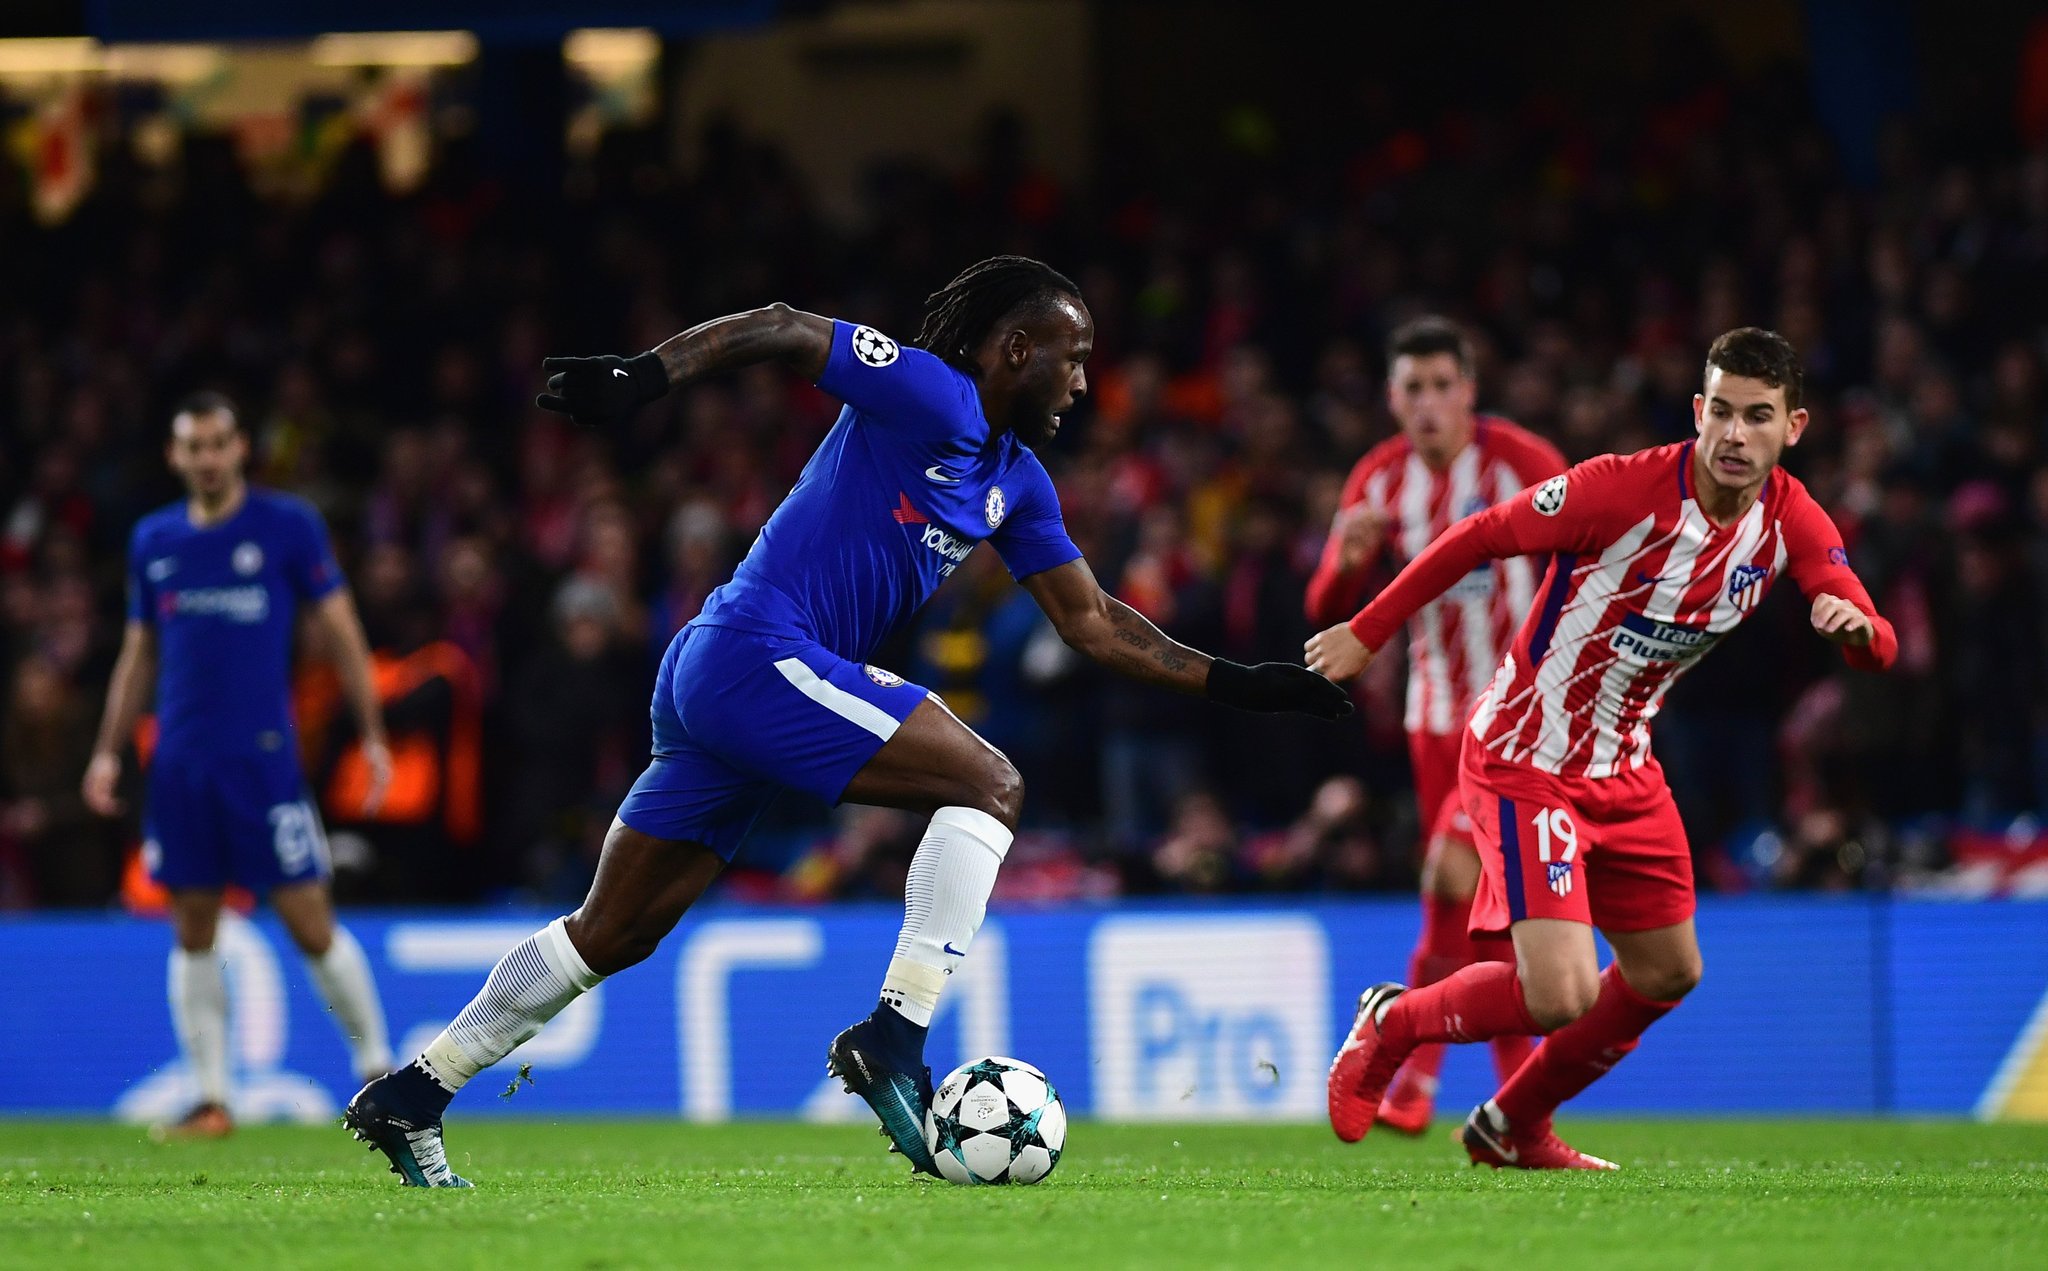 Moses's Chelsea face Champions League last 16 draw after finishing second in group stages